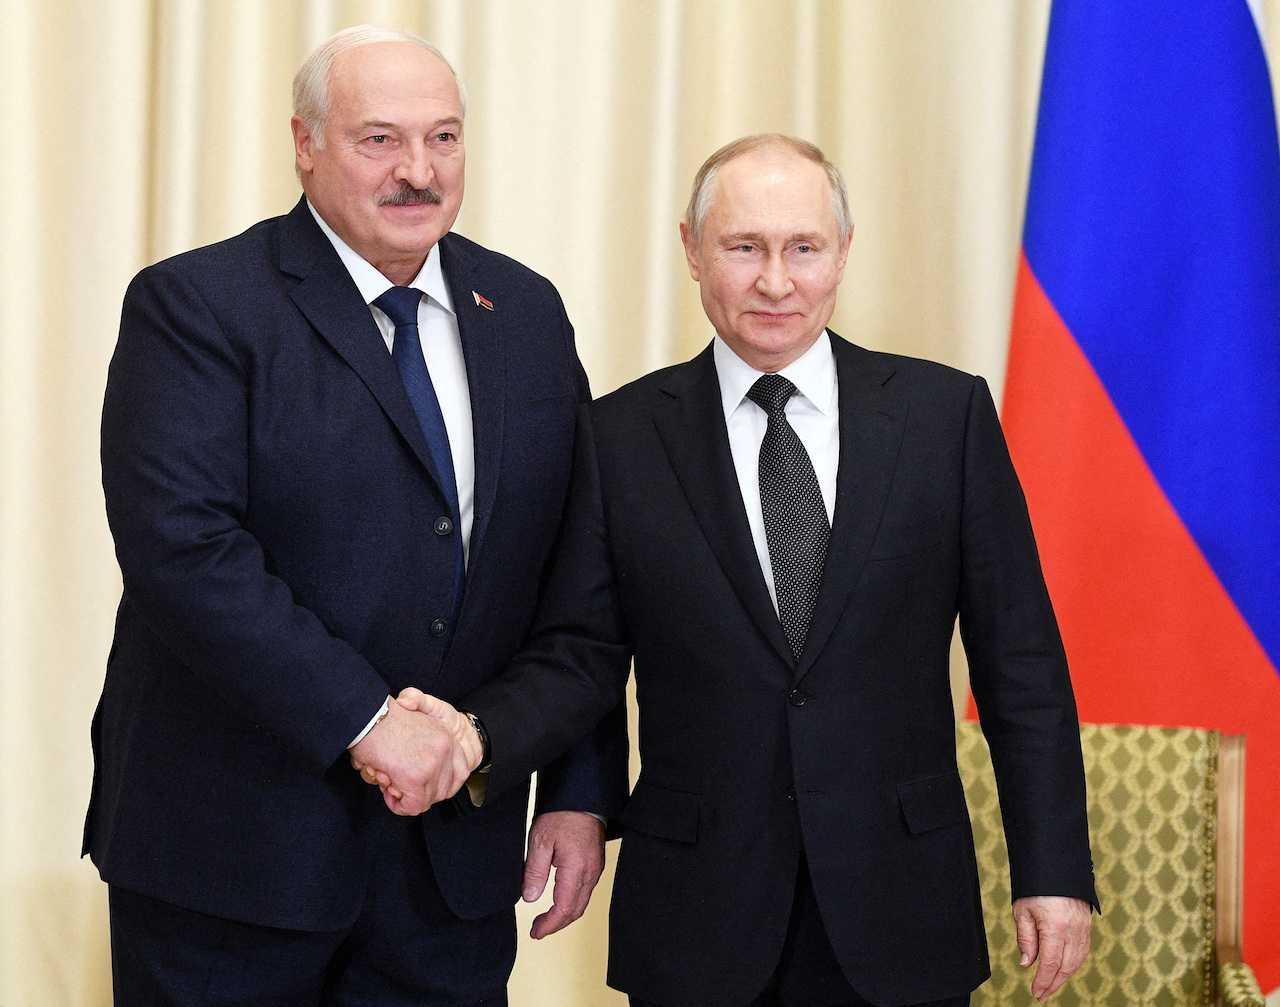 Russian President Vladimir Putin shakes hands with Belarusian President Alexander Lukashenko during a meeting at the Novo-Ogaryovo state residence outside Moscow, Russia, Feb 17. Photo: Reuters